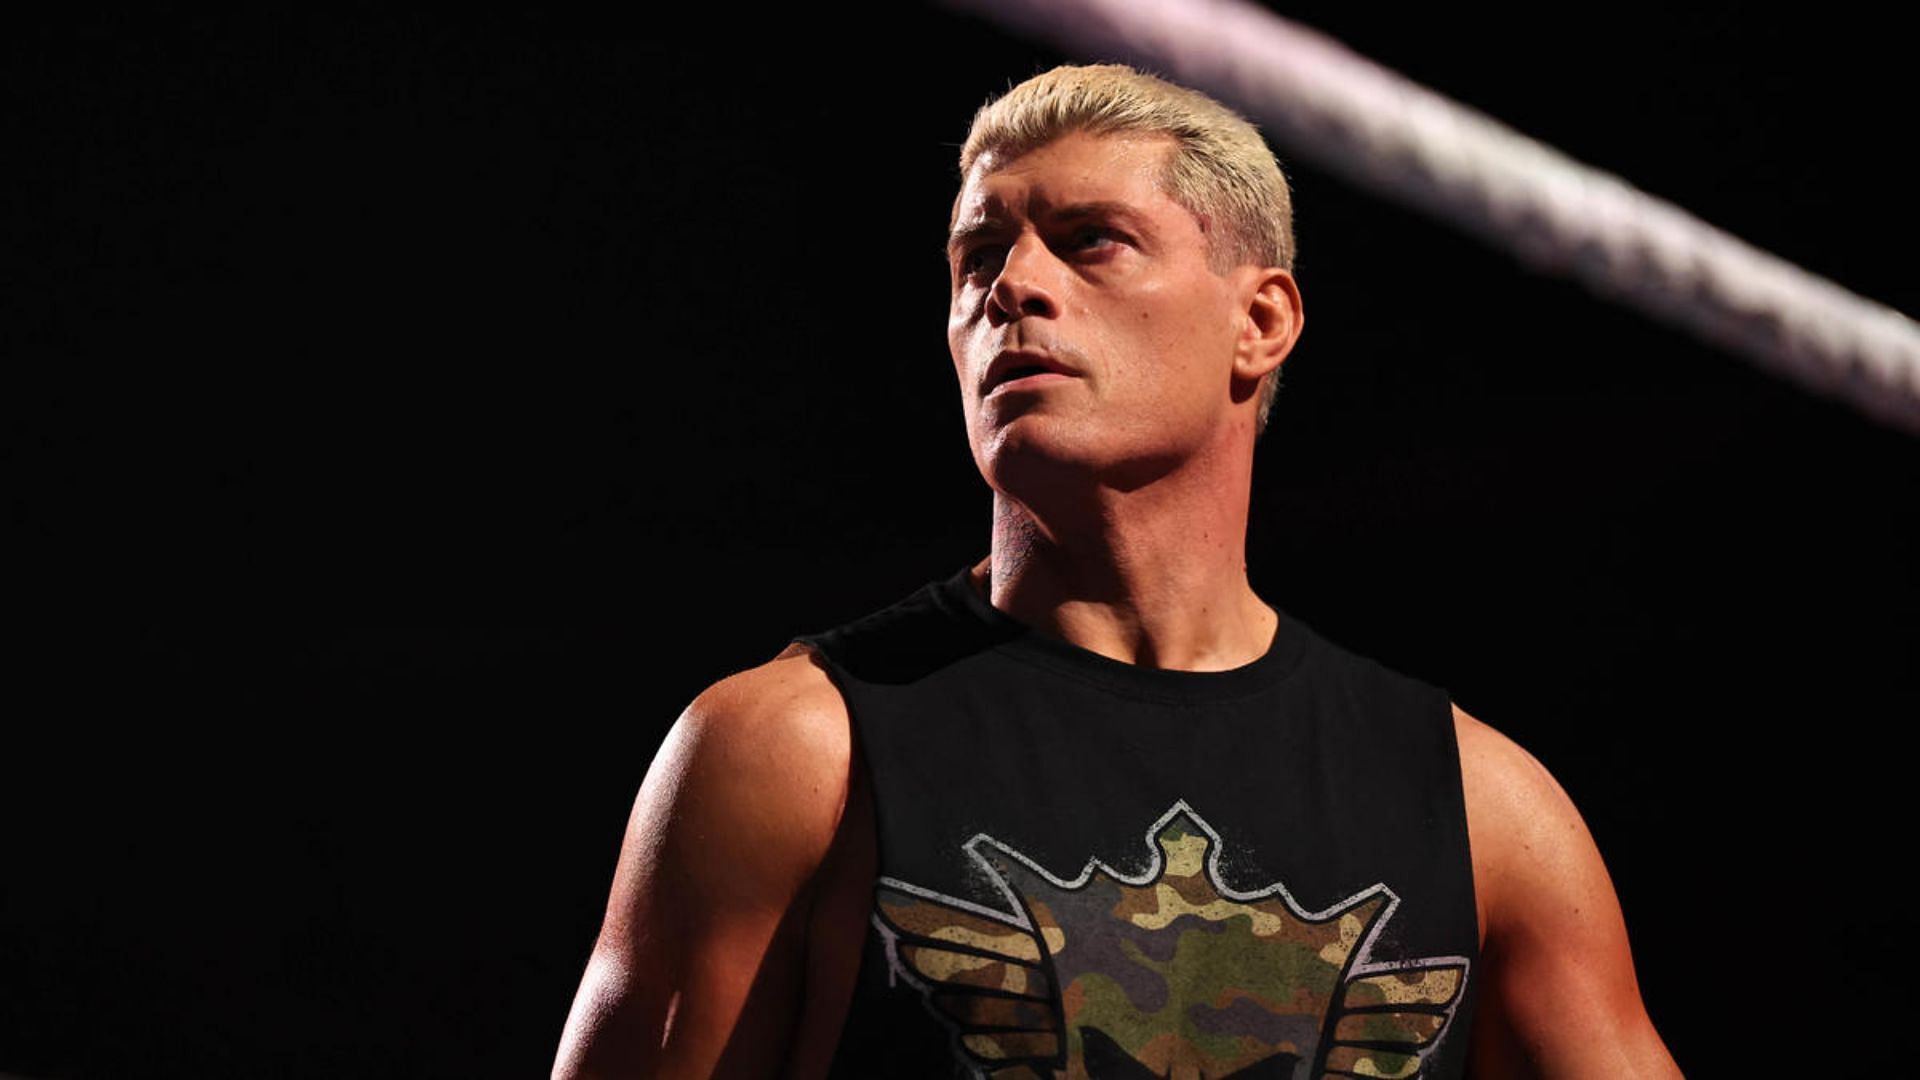 Cody Rhodes is one of the top stars on WWE RAW